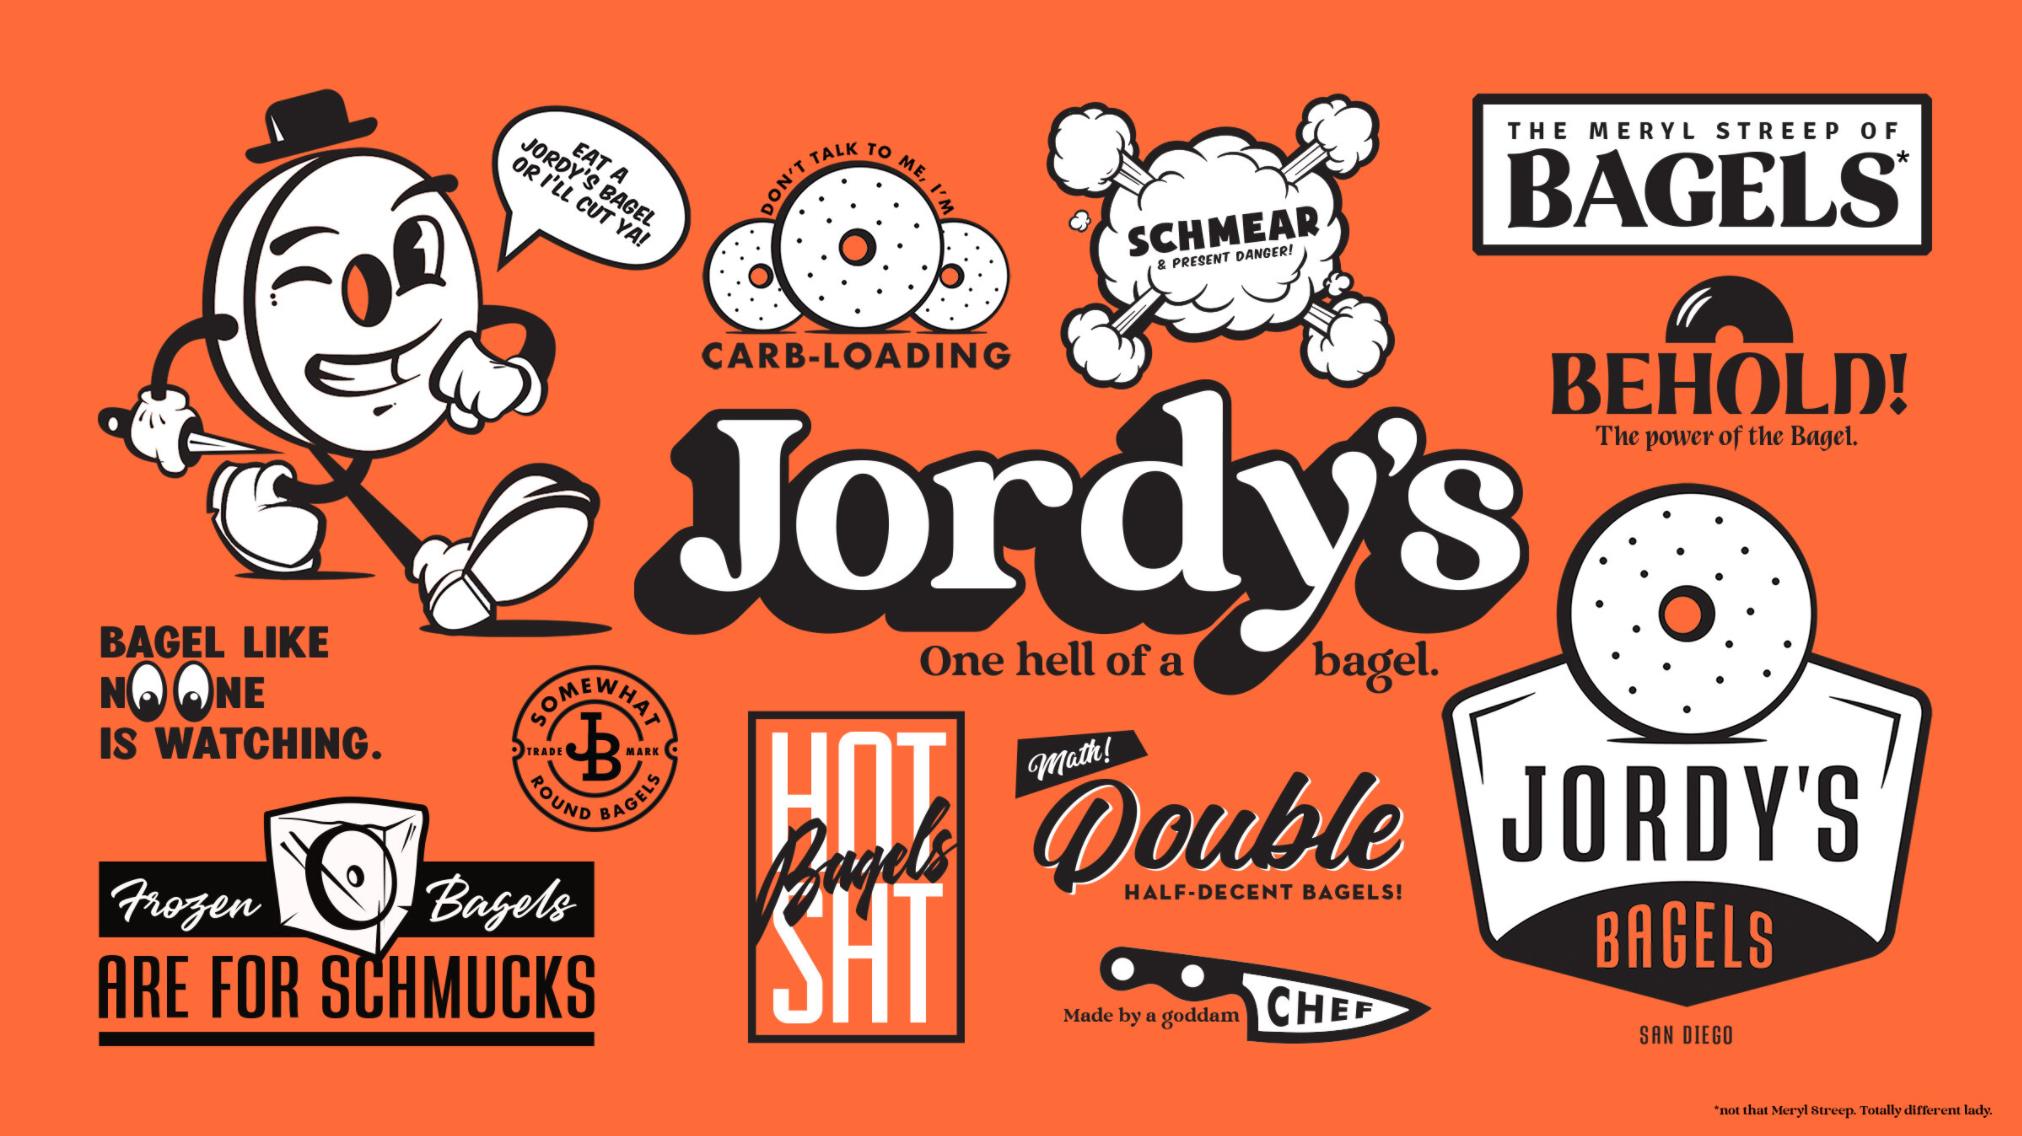 Jordy's: One hell of a bagel